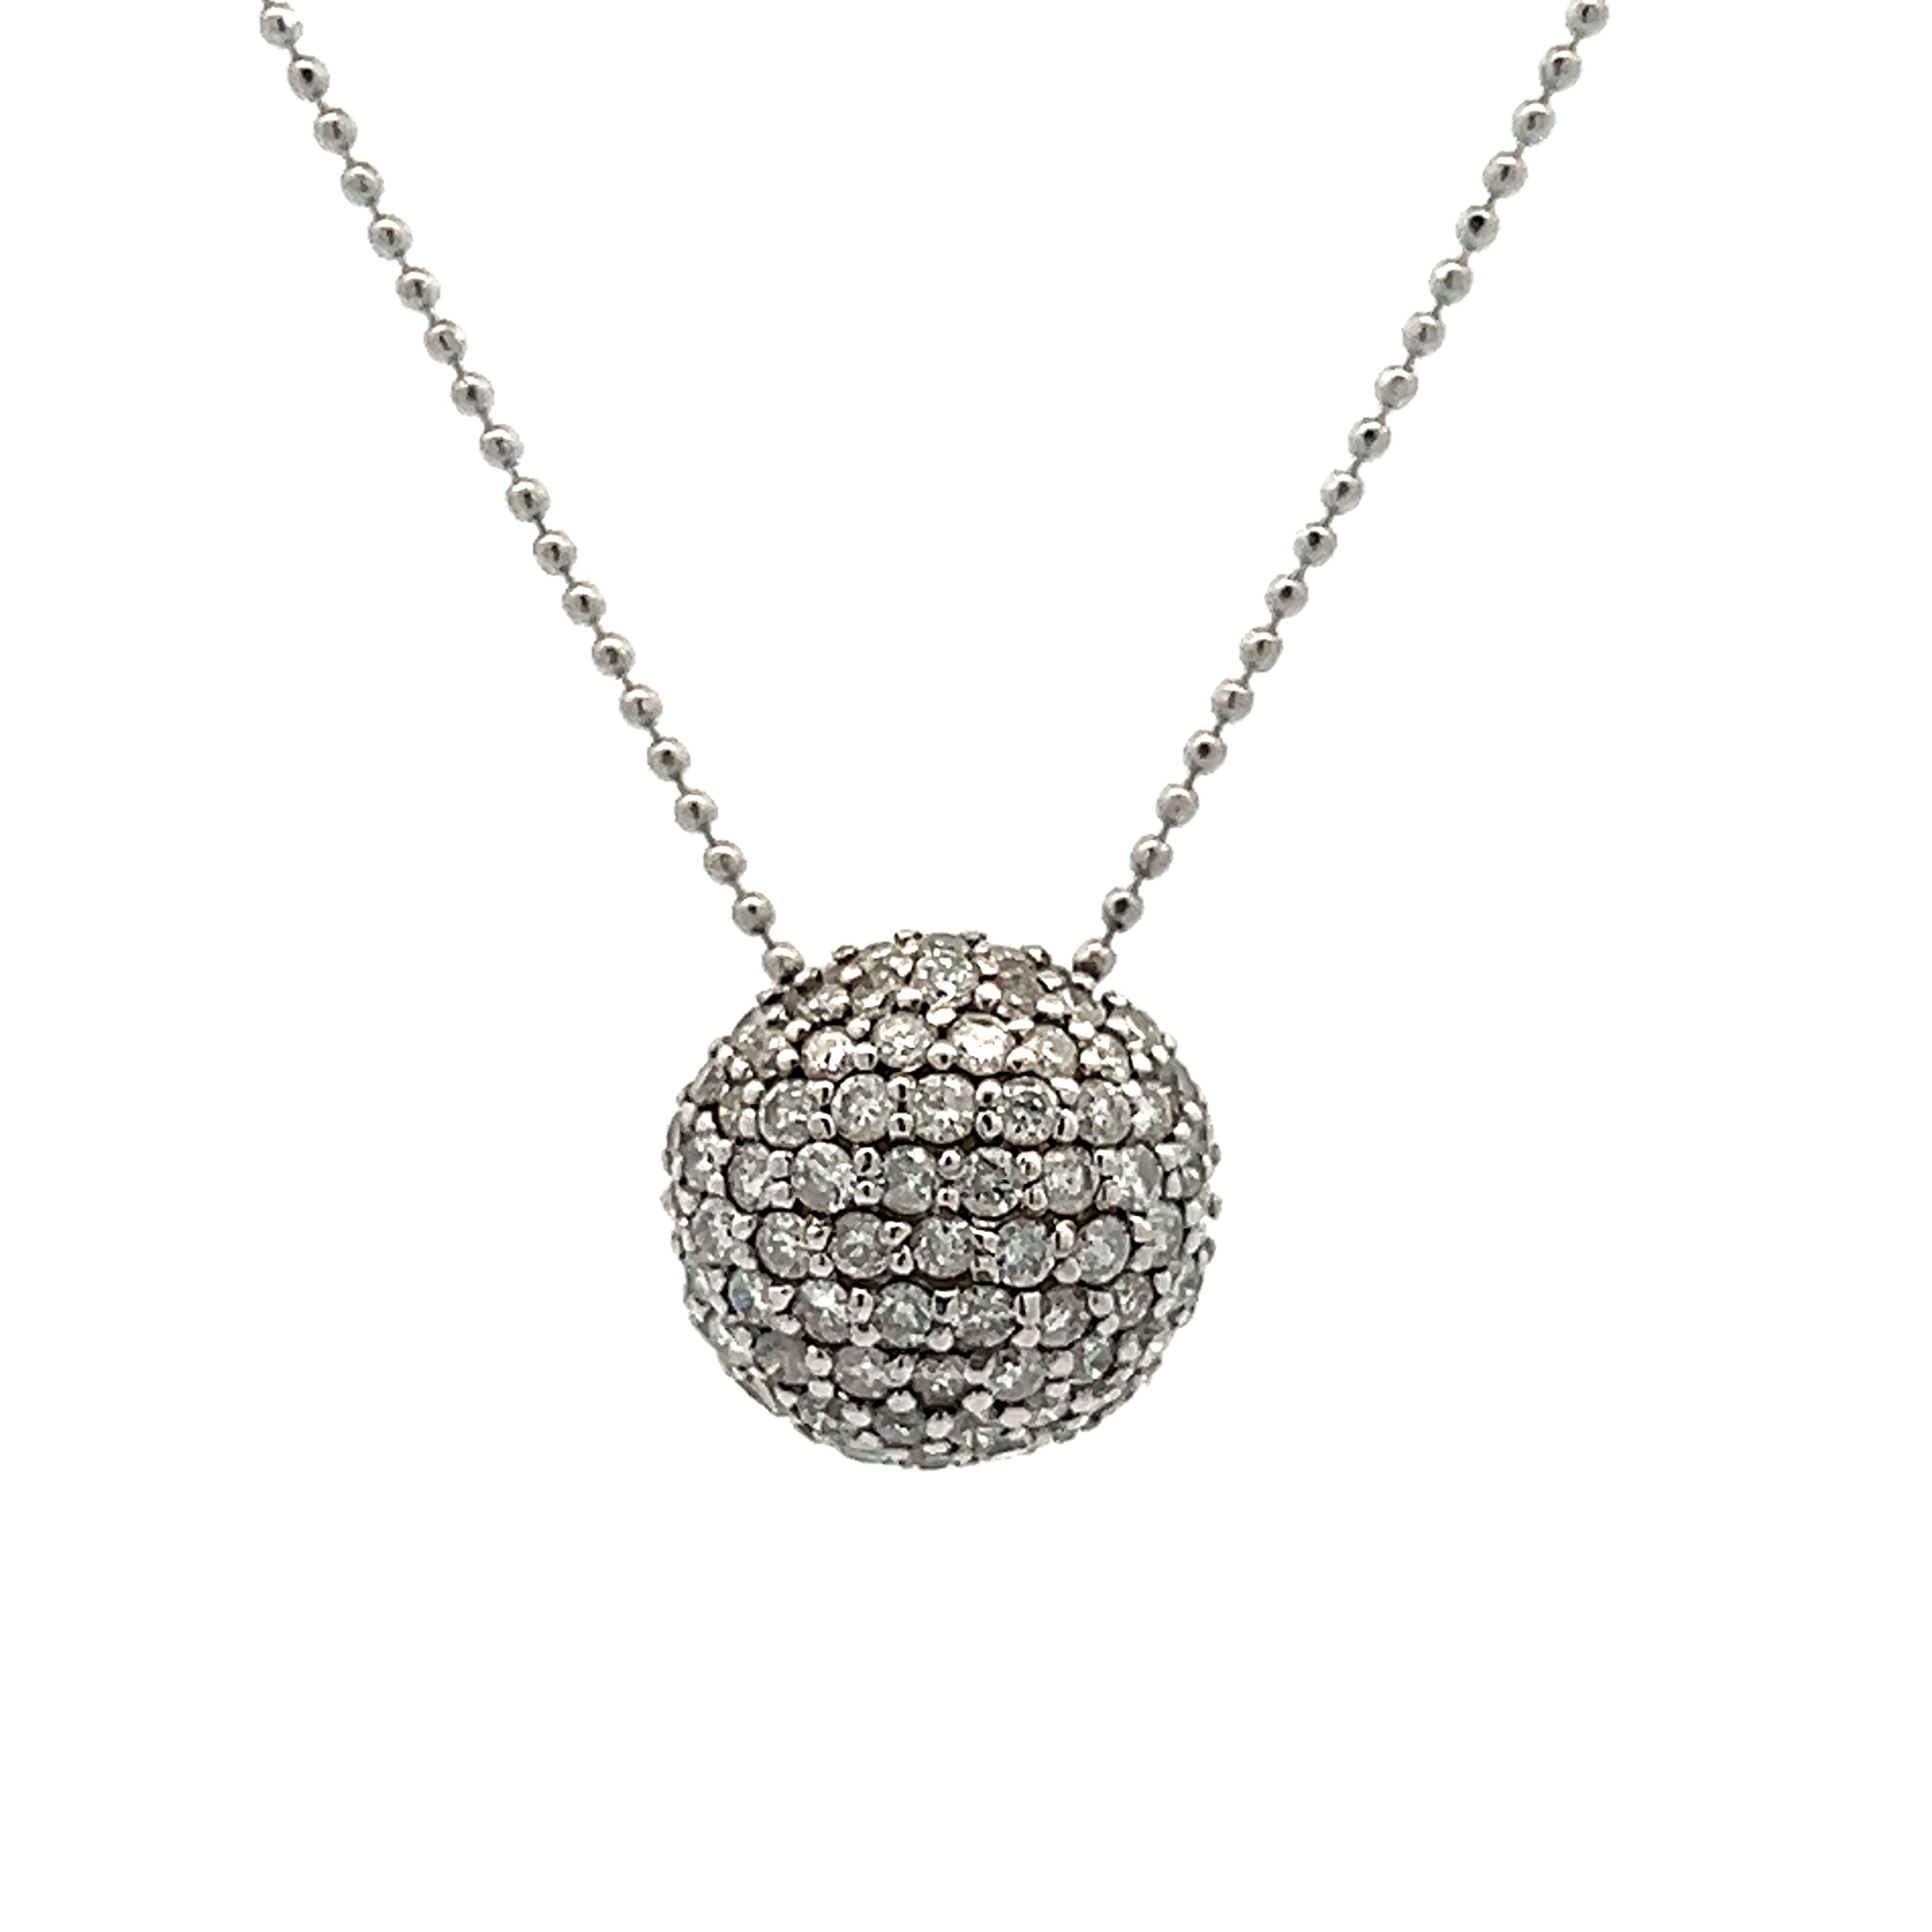 Leddel Necklace 001-165-00086 PL - Diamond Necklaces | Leightons Jewelers  of Merced | Merced, CA